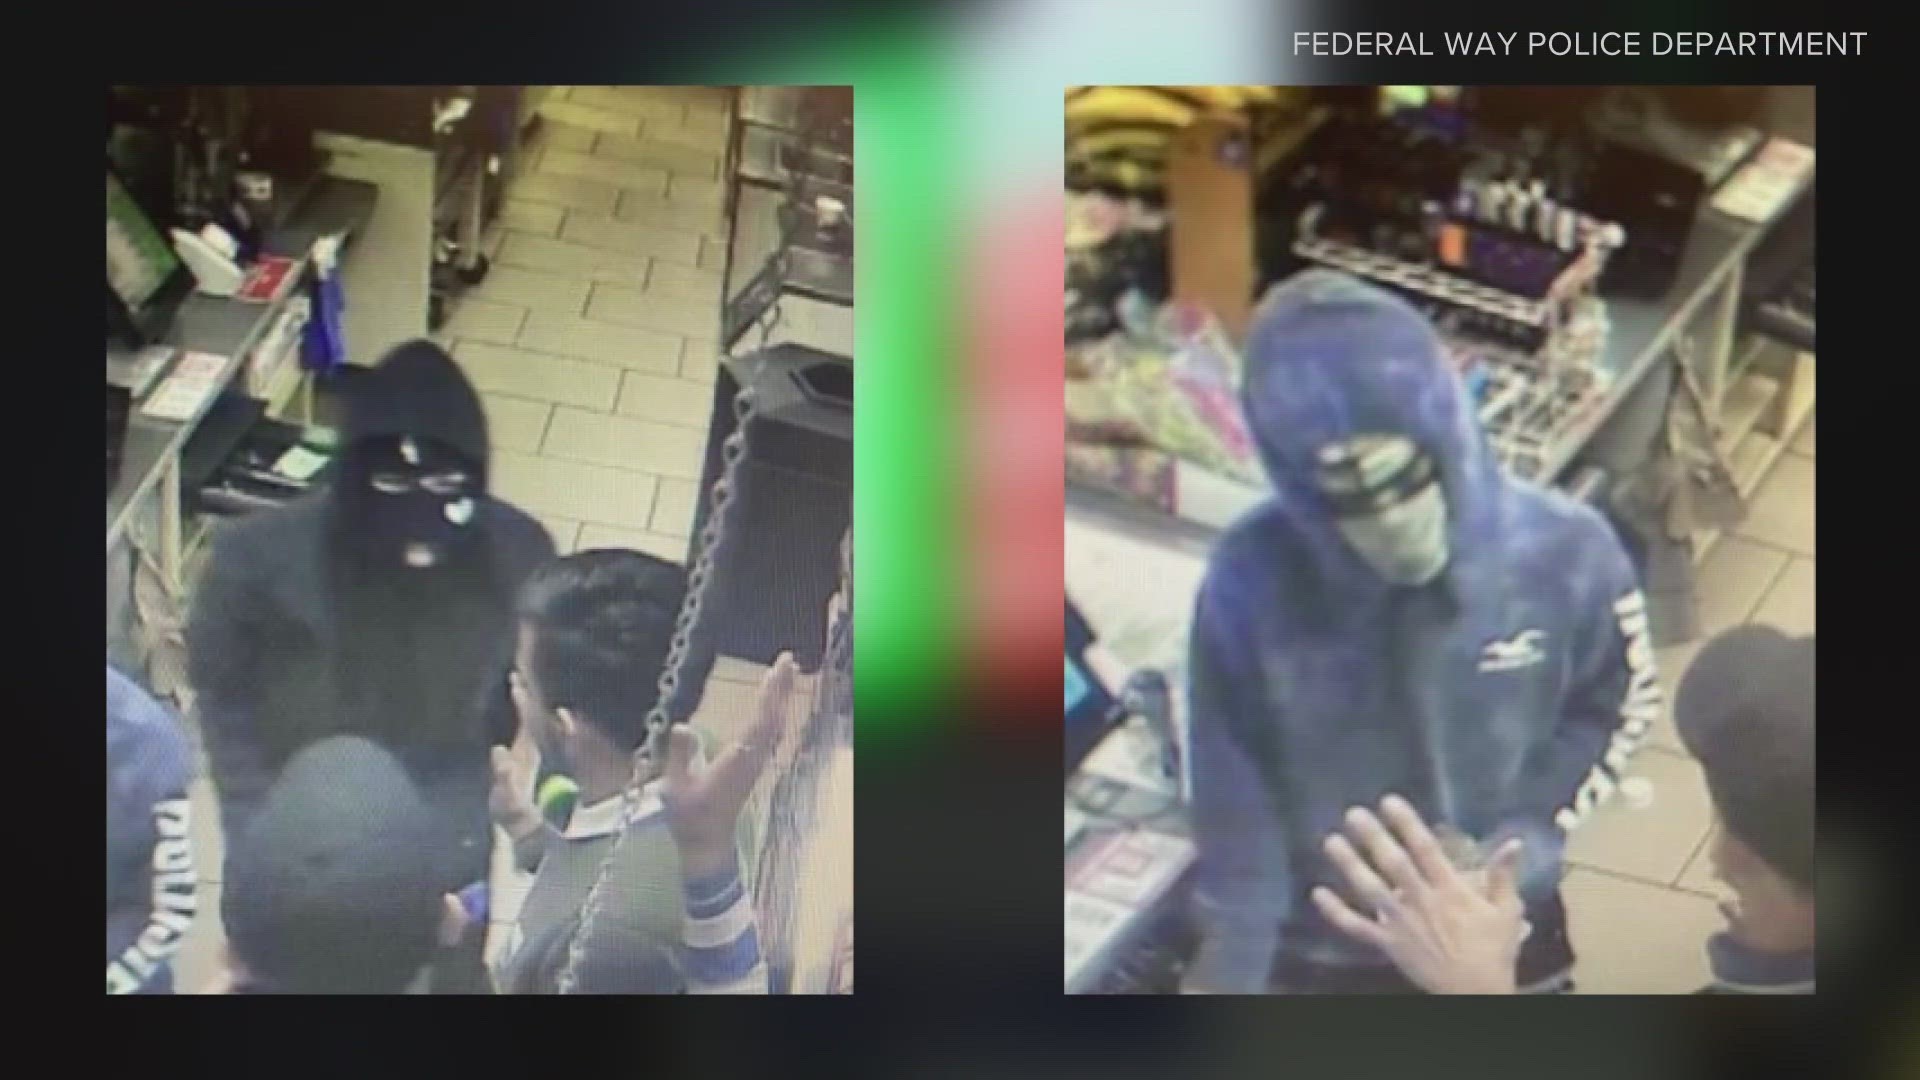 Within several hours, there were robberies at 7-Eleven locations in Auburn, Renton and Federal Way.